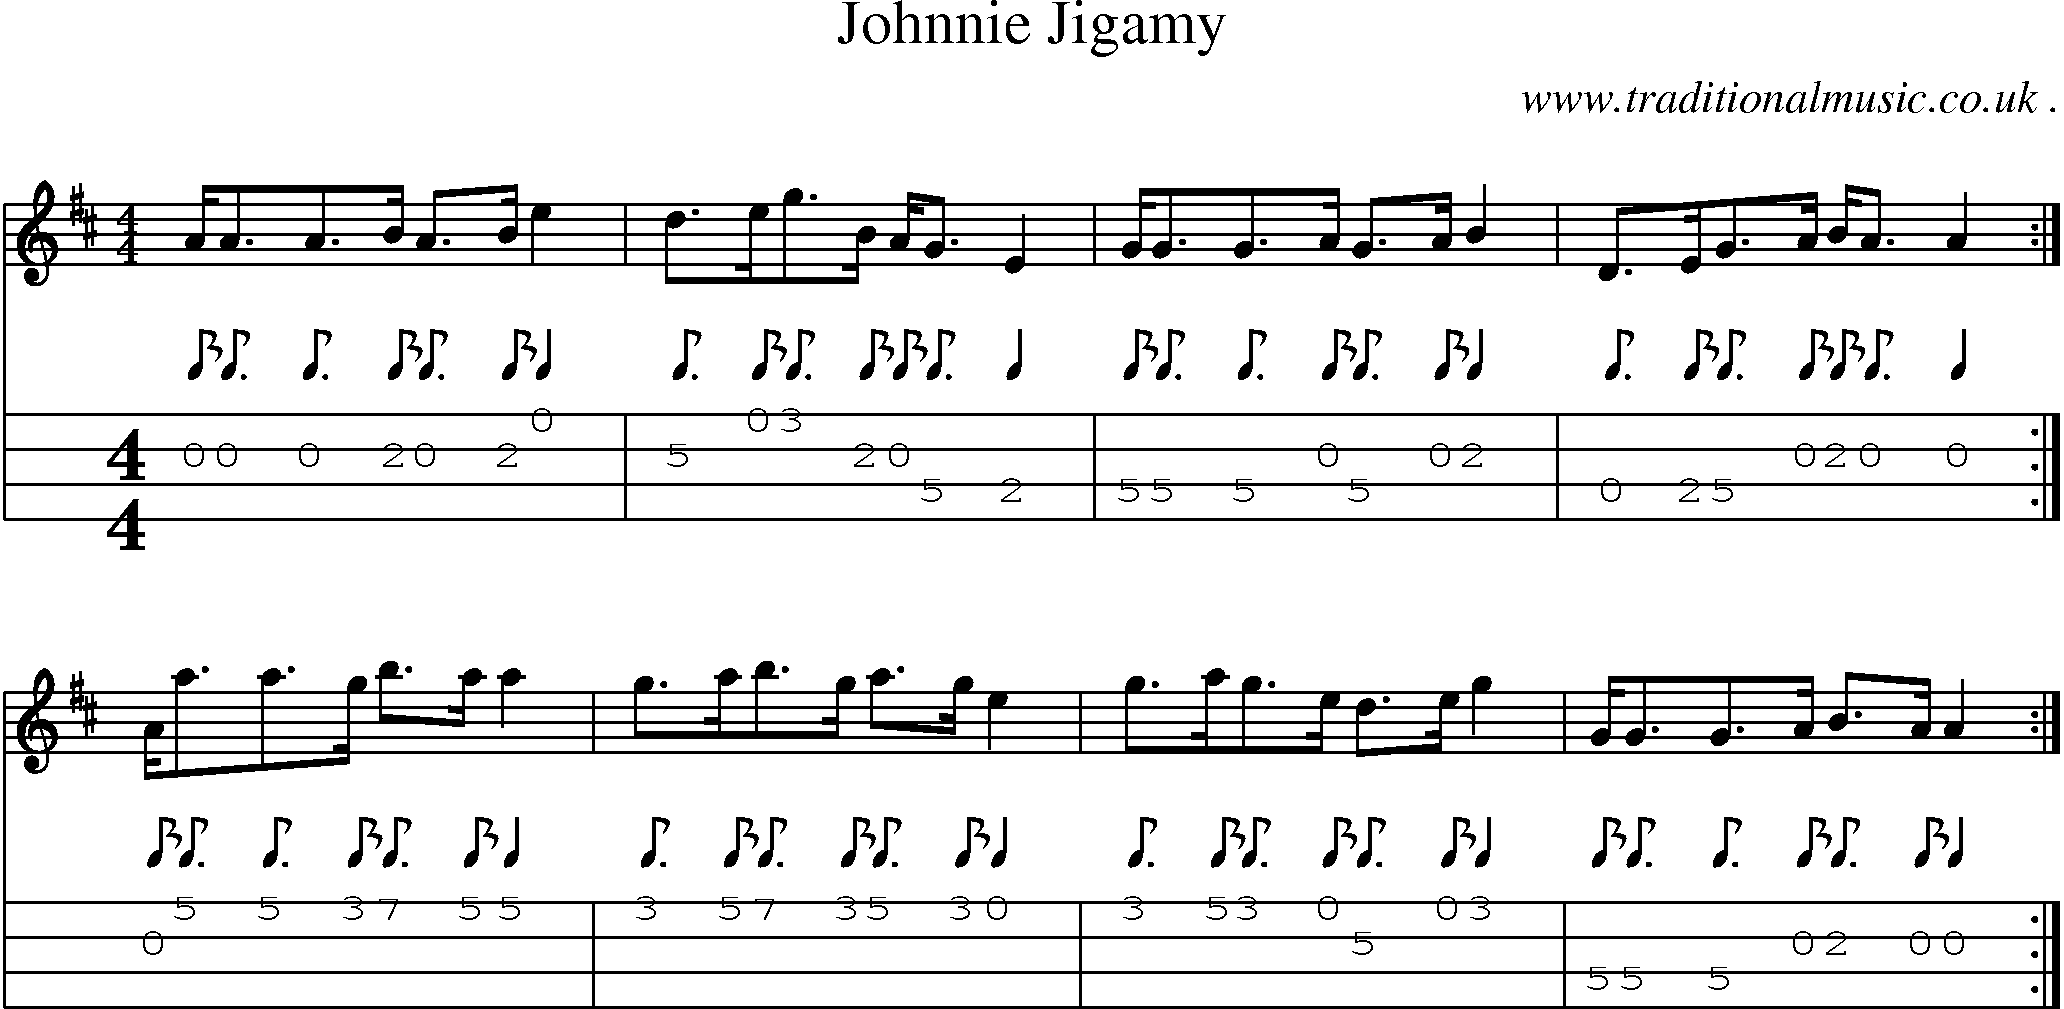 Sheet-music  score, Chords and Mandolin Tabs for Johnnie Jigamy